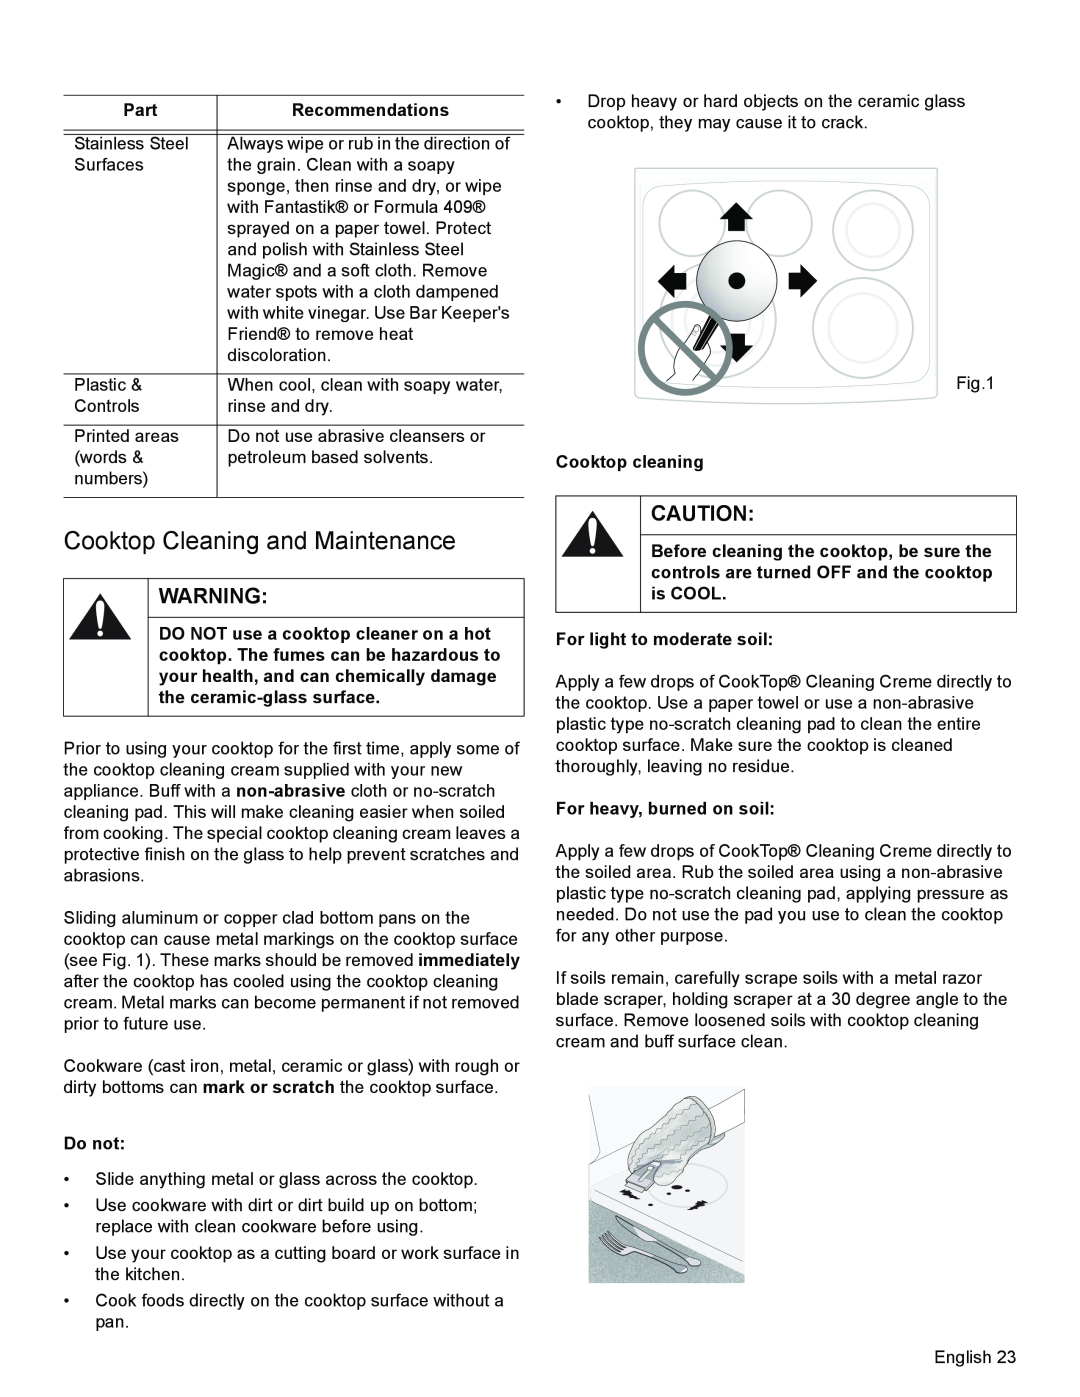 Bosch Appliances HES3053U manual Cooktop Cleaning and Maintenance, Part, Recommendations, Do not, Cooktop cleaning 